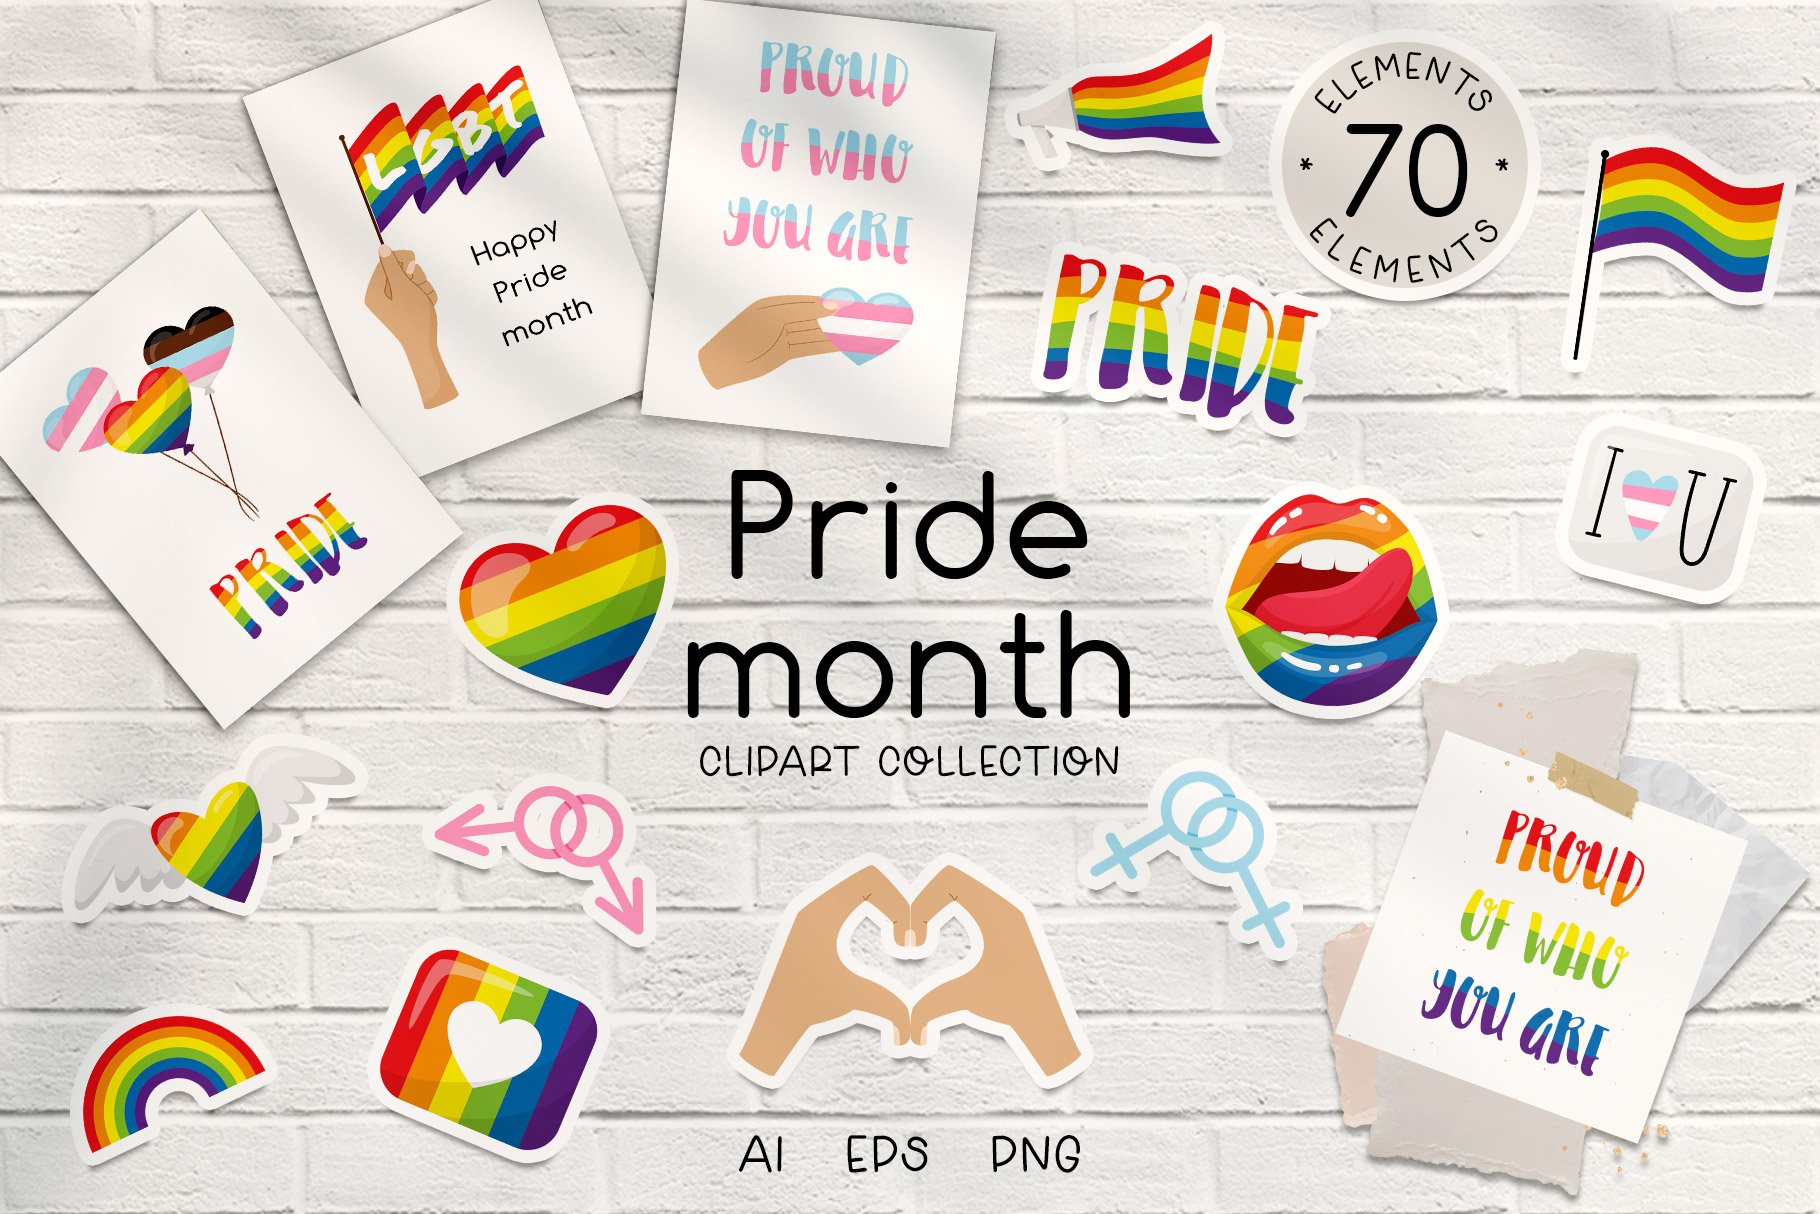 Pride Month Cliparts cover image.